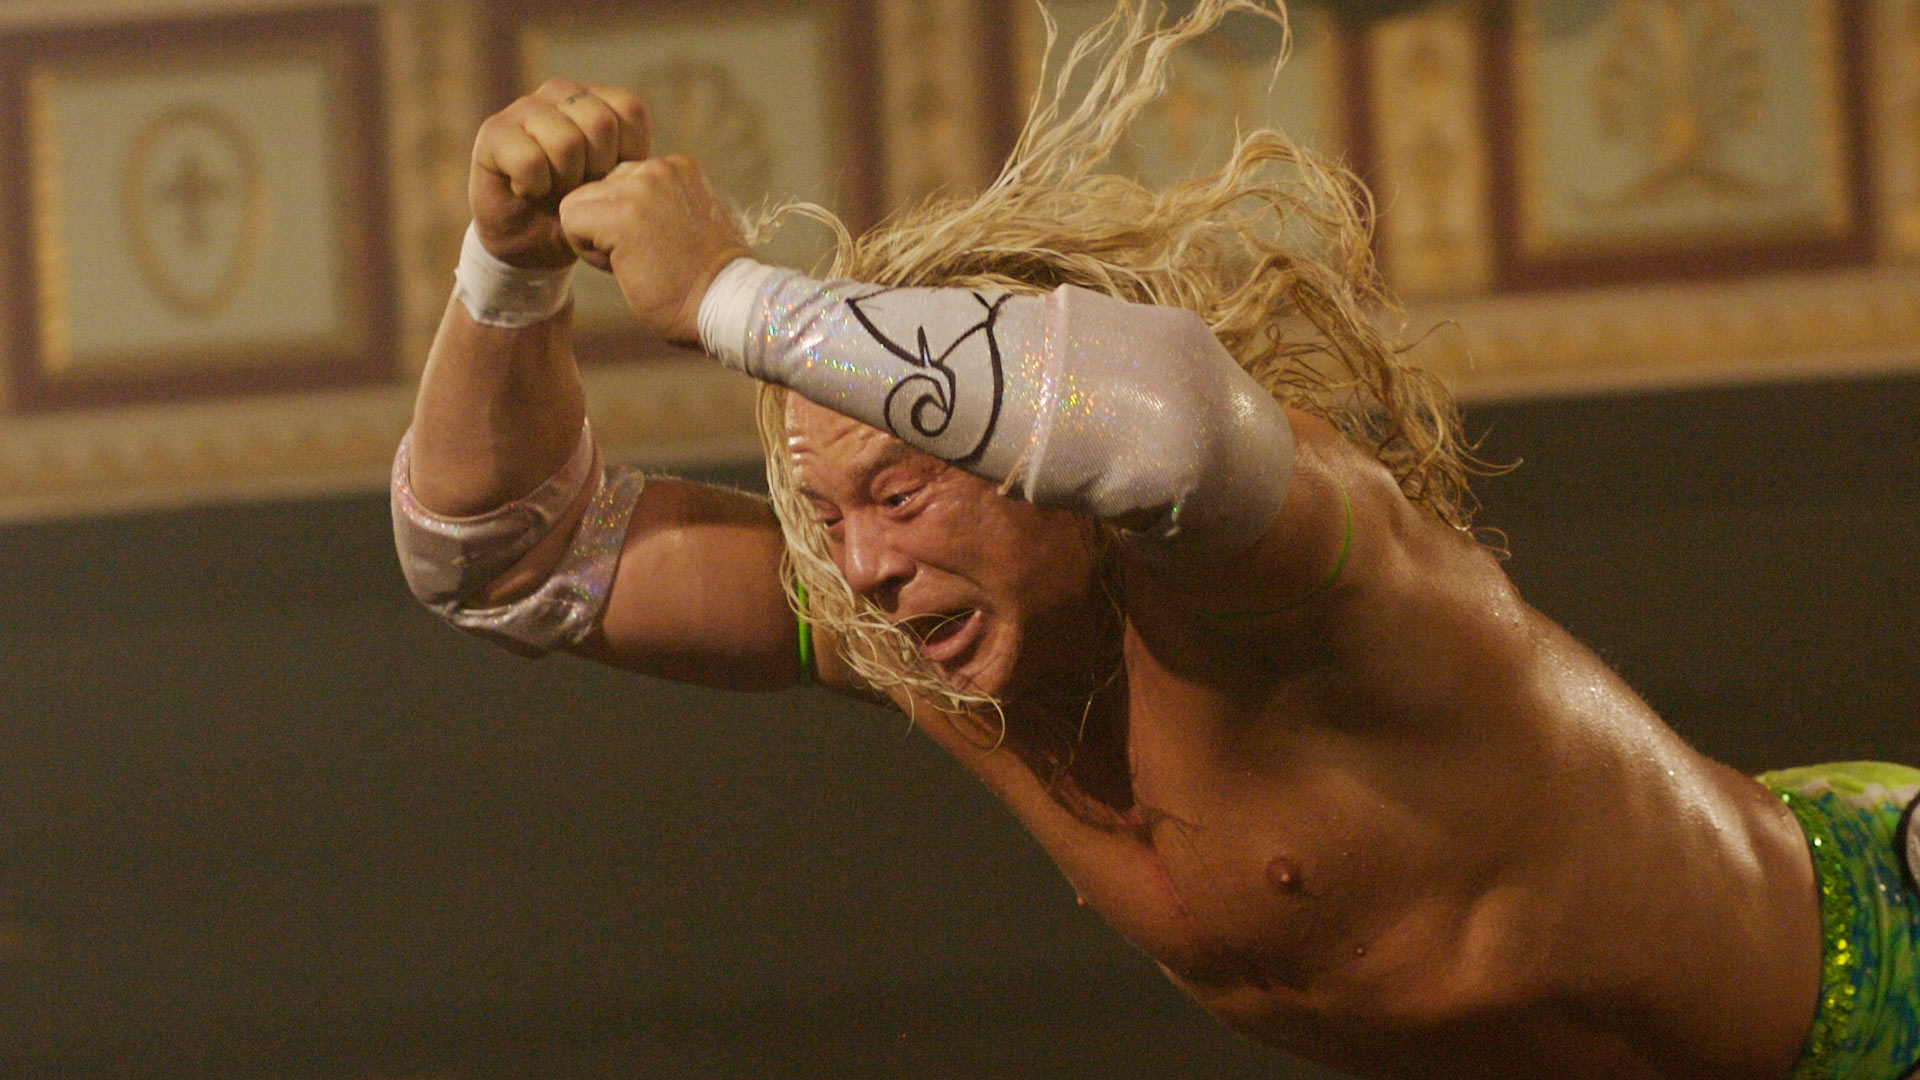 The Wrestler (Movie): Mickey Rourke, An American actor and former boxer. 1920x1080 Full HD Background.